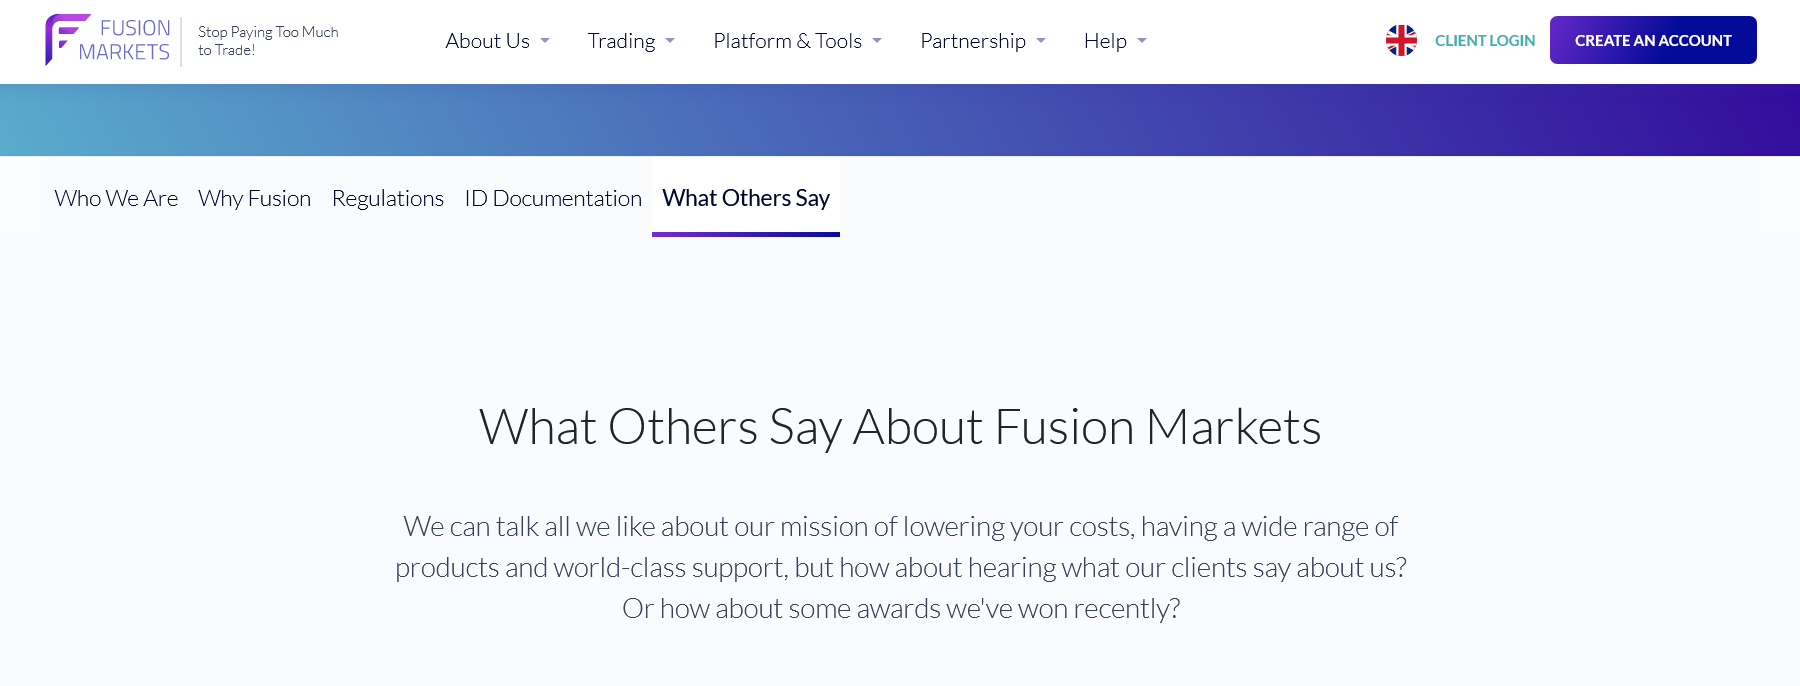 Fussion Markets Awards